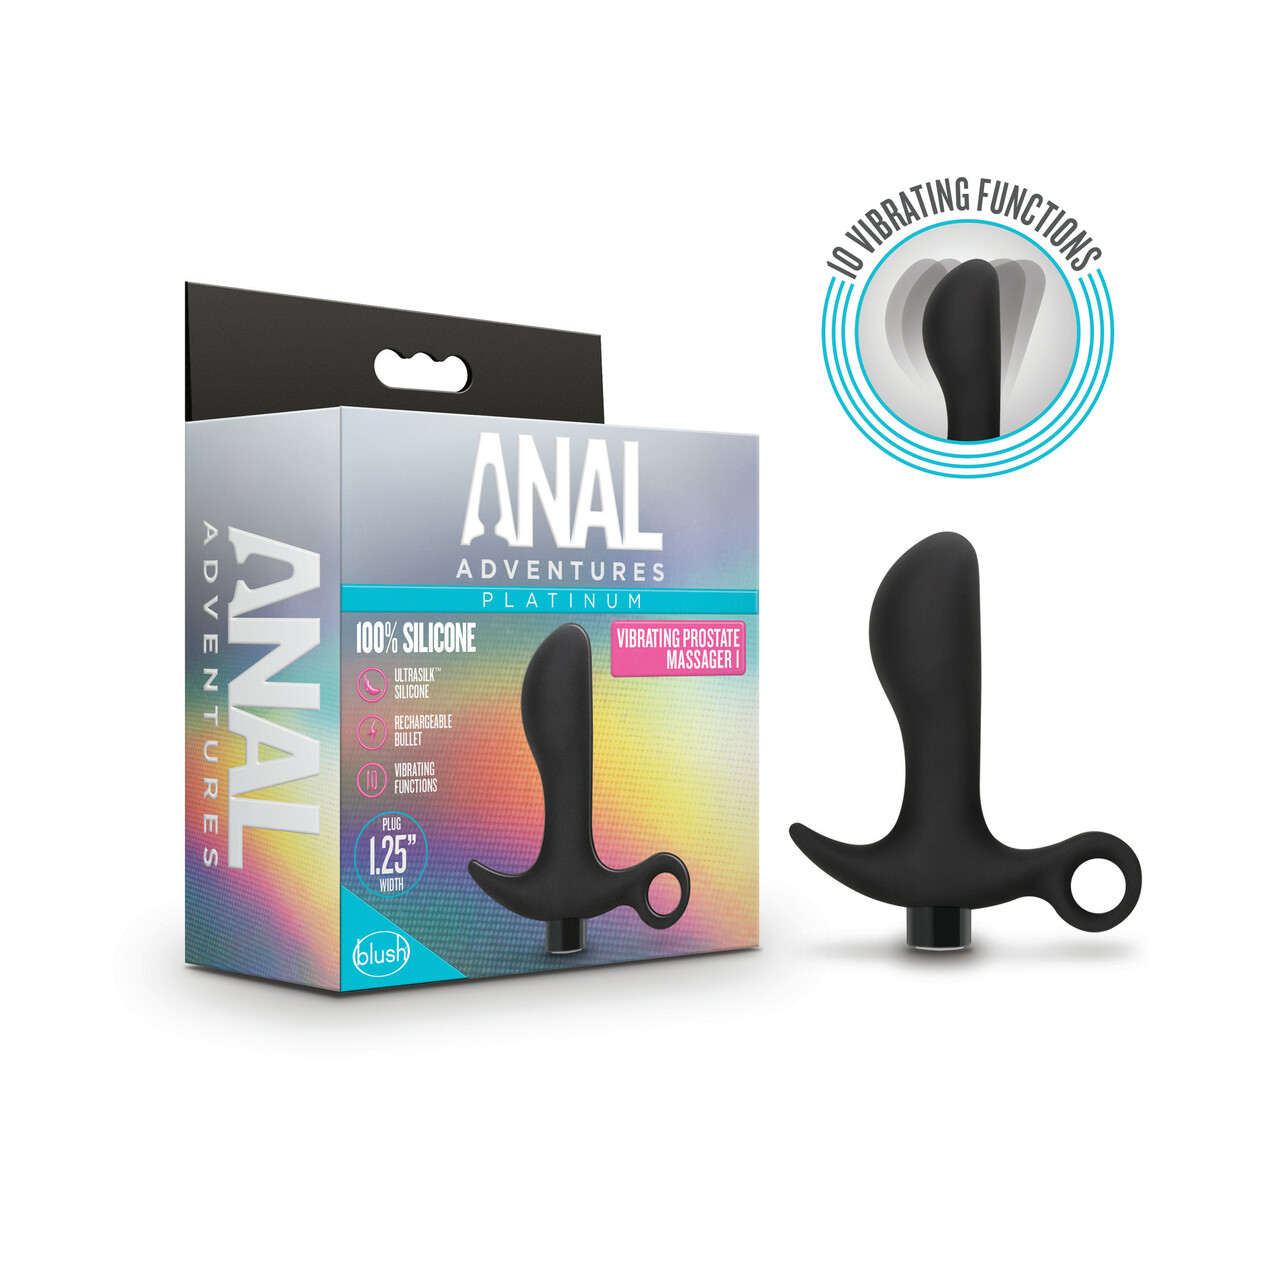 ANAL ADVENTURES PLATINUM SILICONE VIBRATING PROSTATE MASSAGER 1 BLACK - Click Image to Close